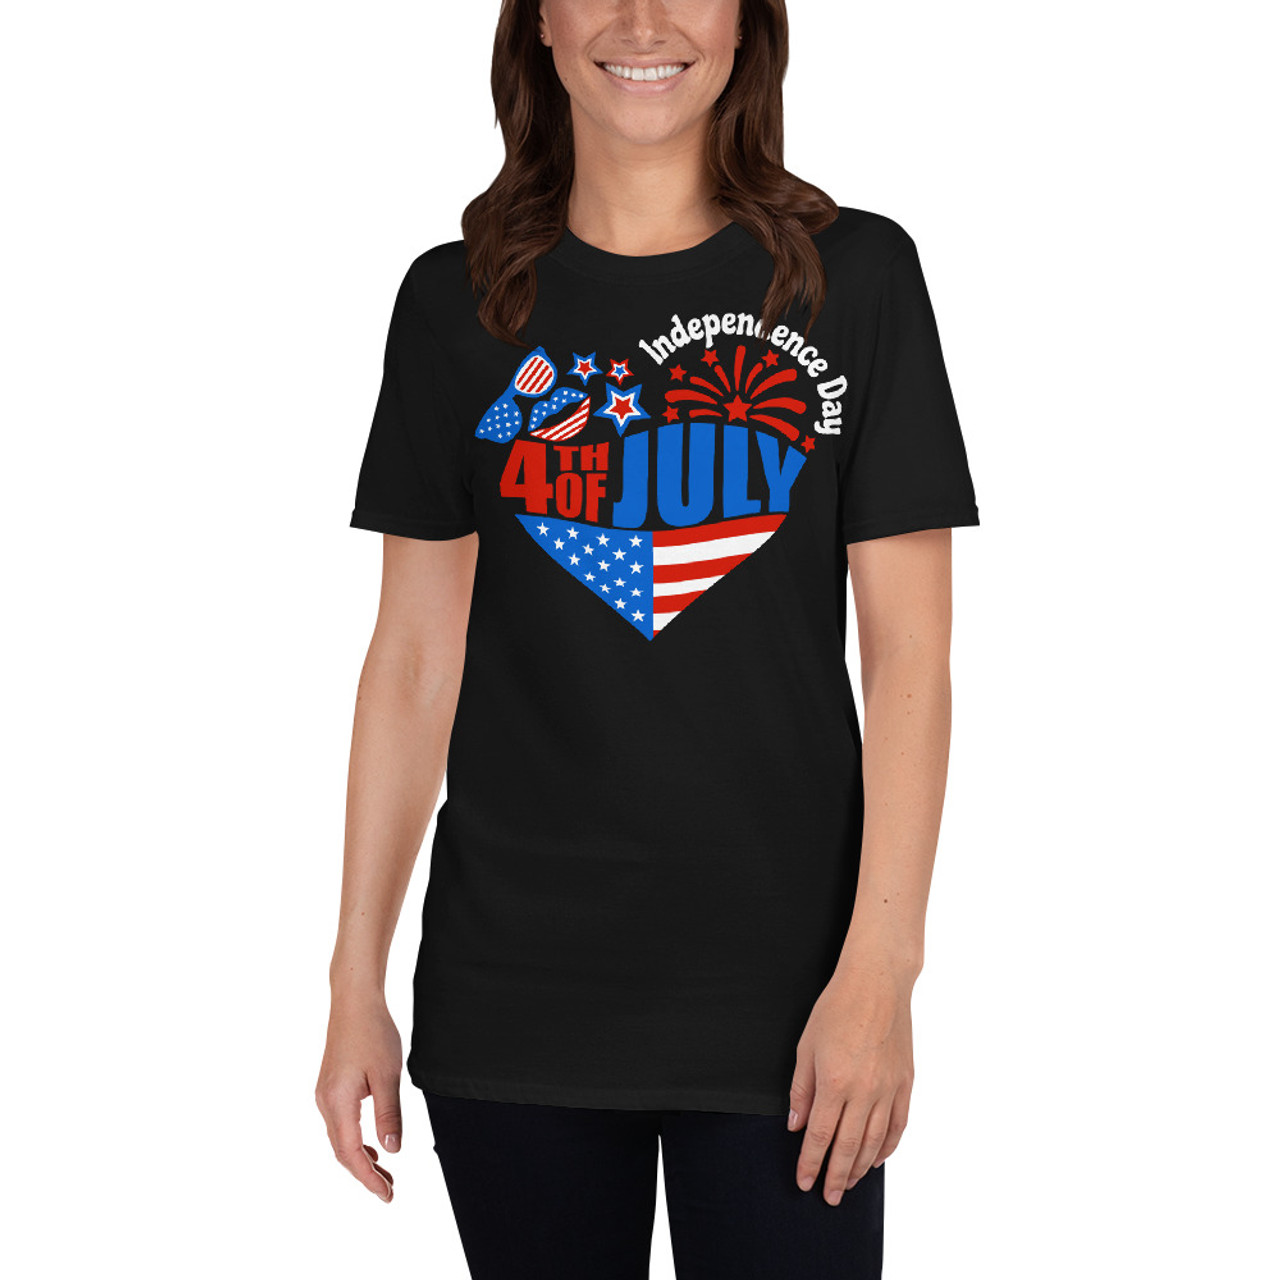 4th of July Heart Short-Sleeve Unisex T-Shirt - Meach's Military ...